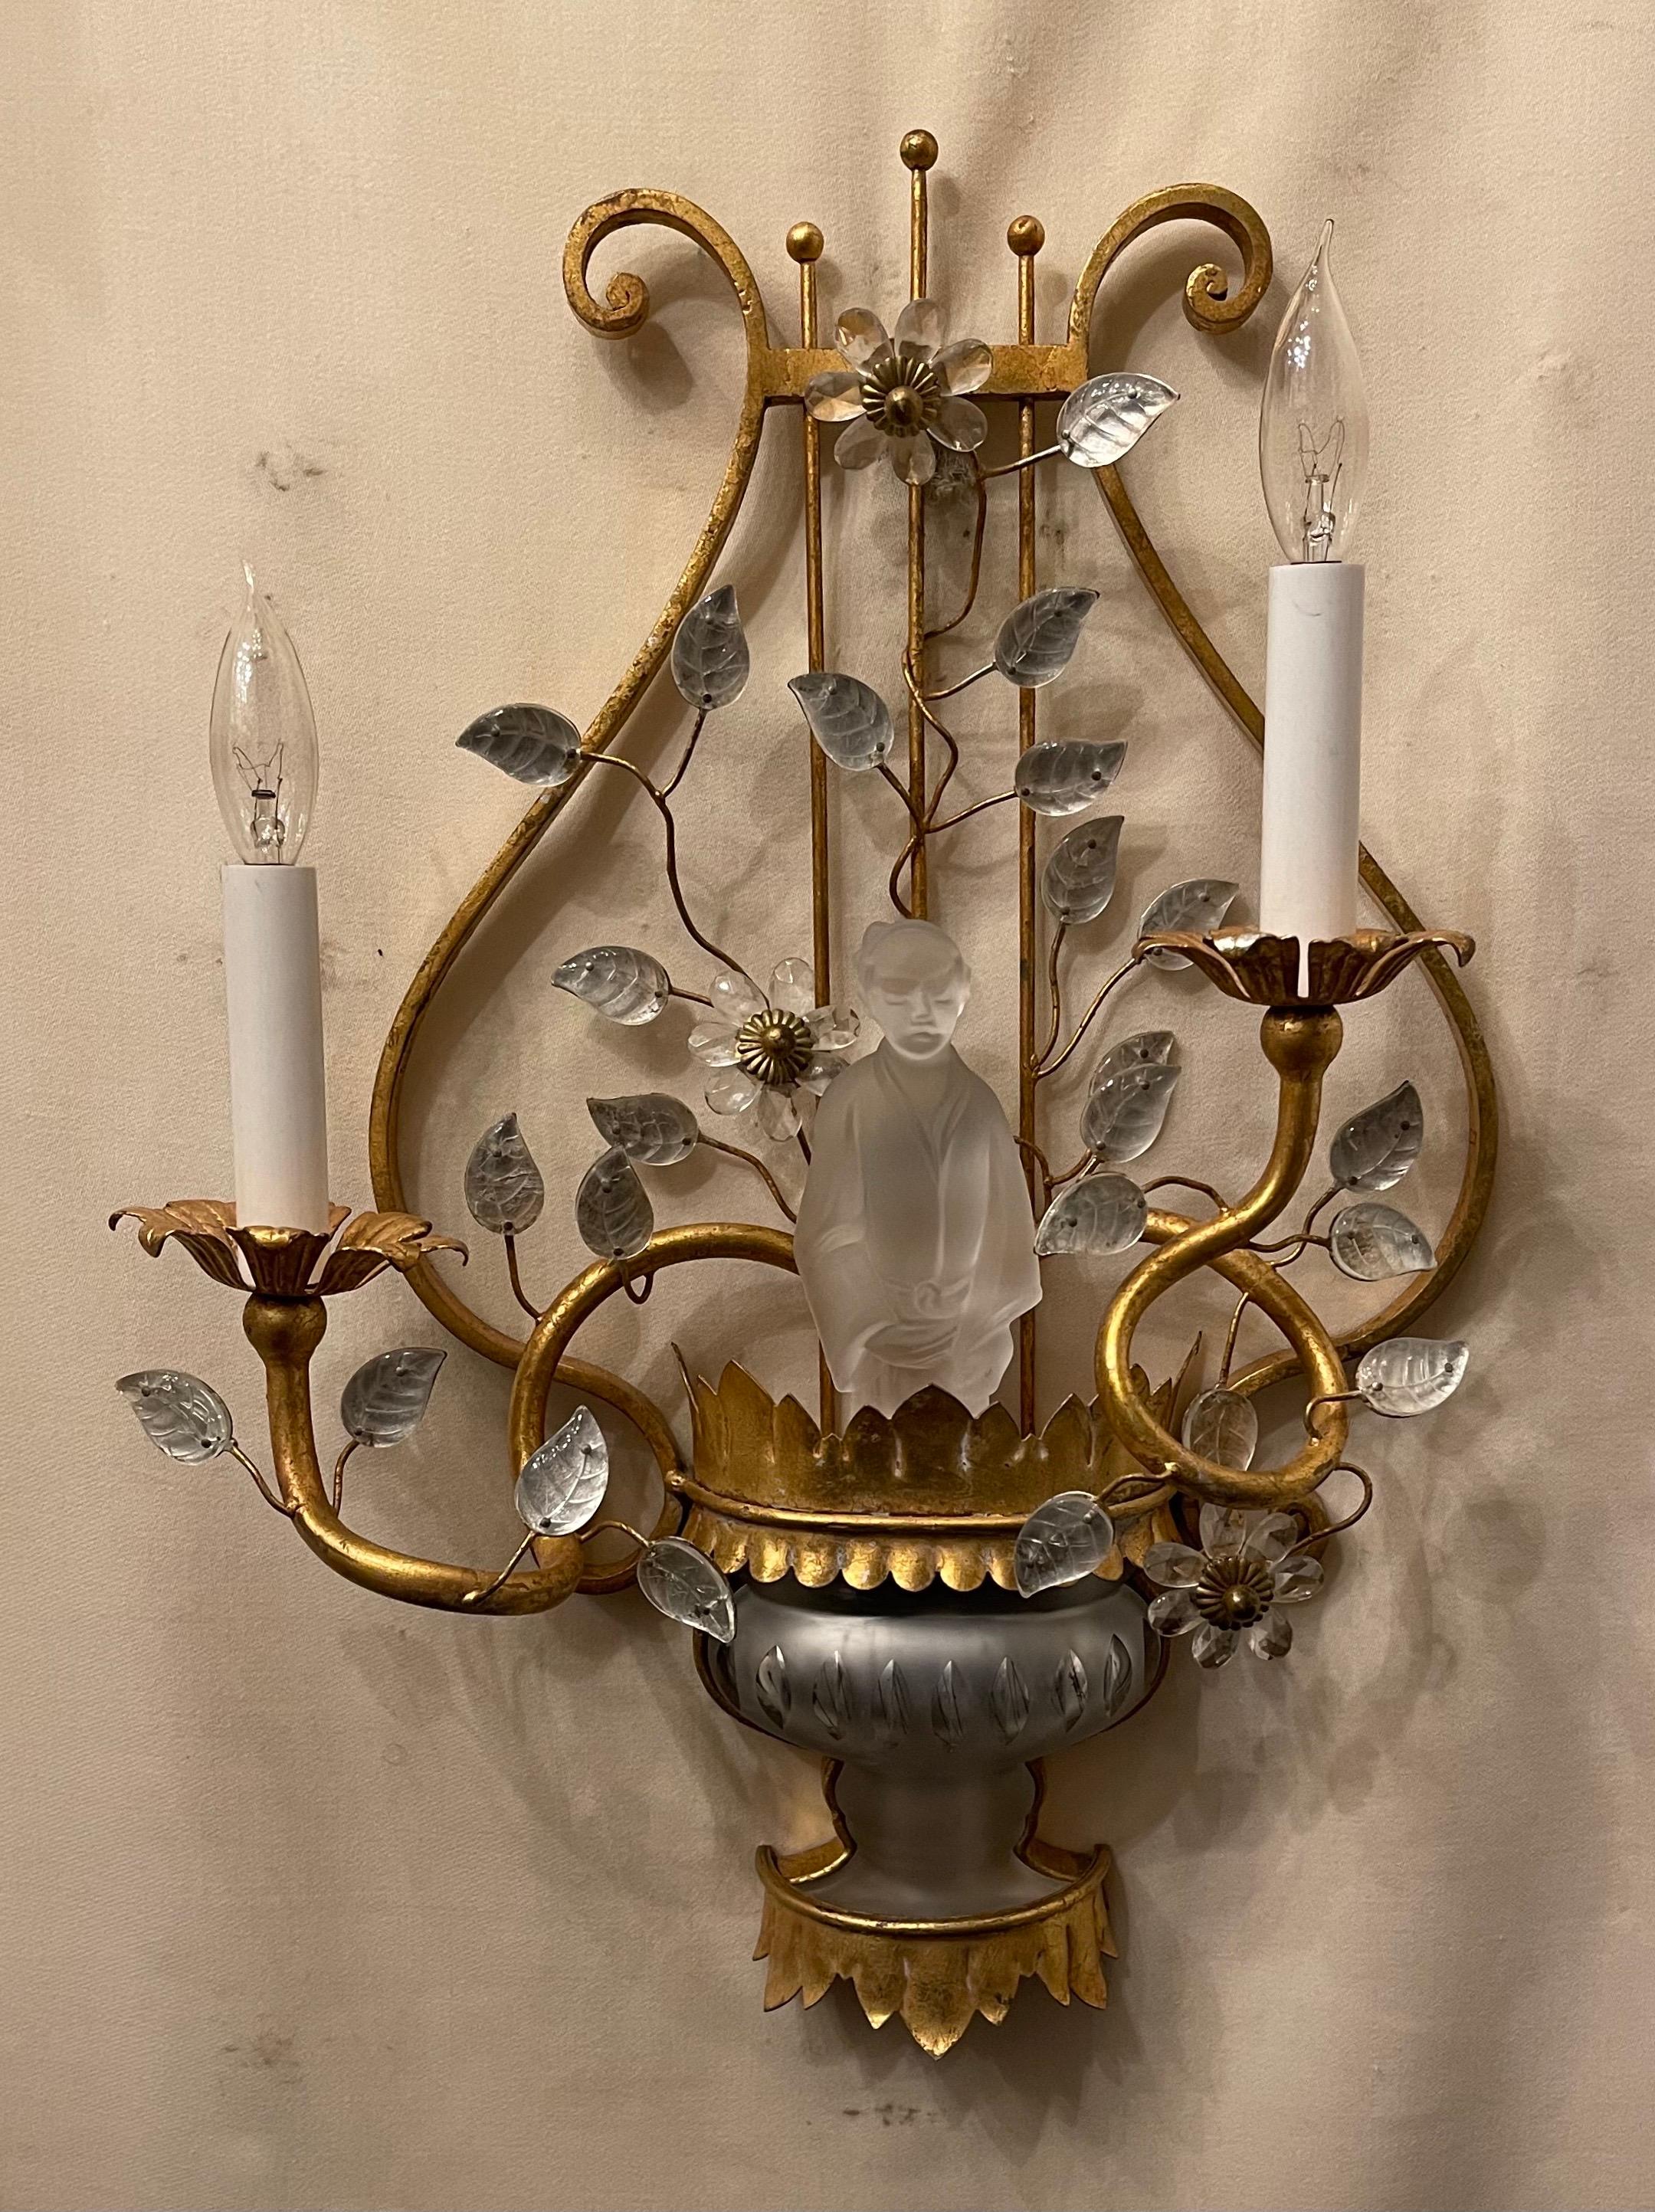 Wonderful Pair Of Maison Bagues / Sherle Wagner Manner Chinoiserie Gold Gilt Harp Back Two Candelabra Light Wall Sconces With Crystal Leaves And Removable Frosted Crystal Chinoiserie Figurines. 
Purchased In France, Wiring Is Up To Date And Ready